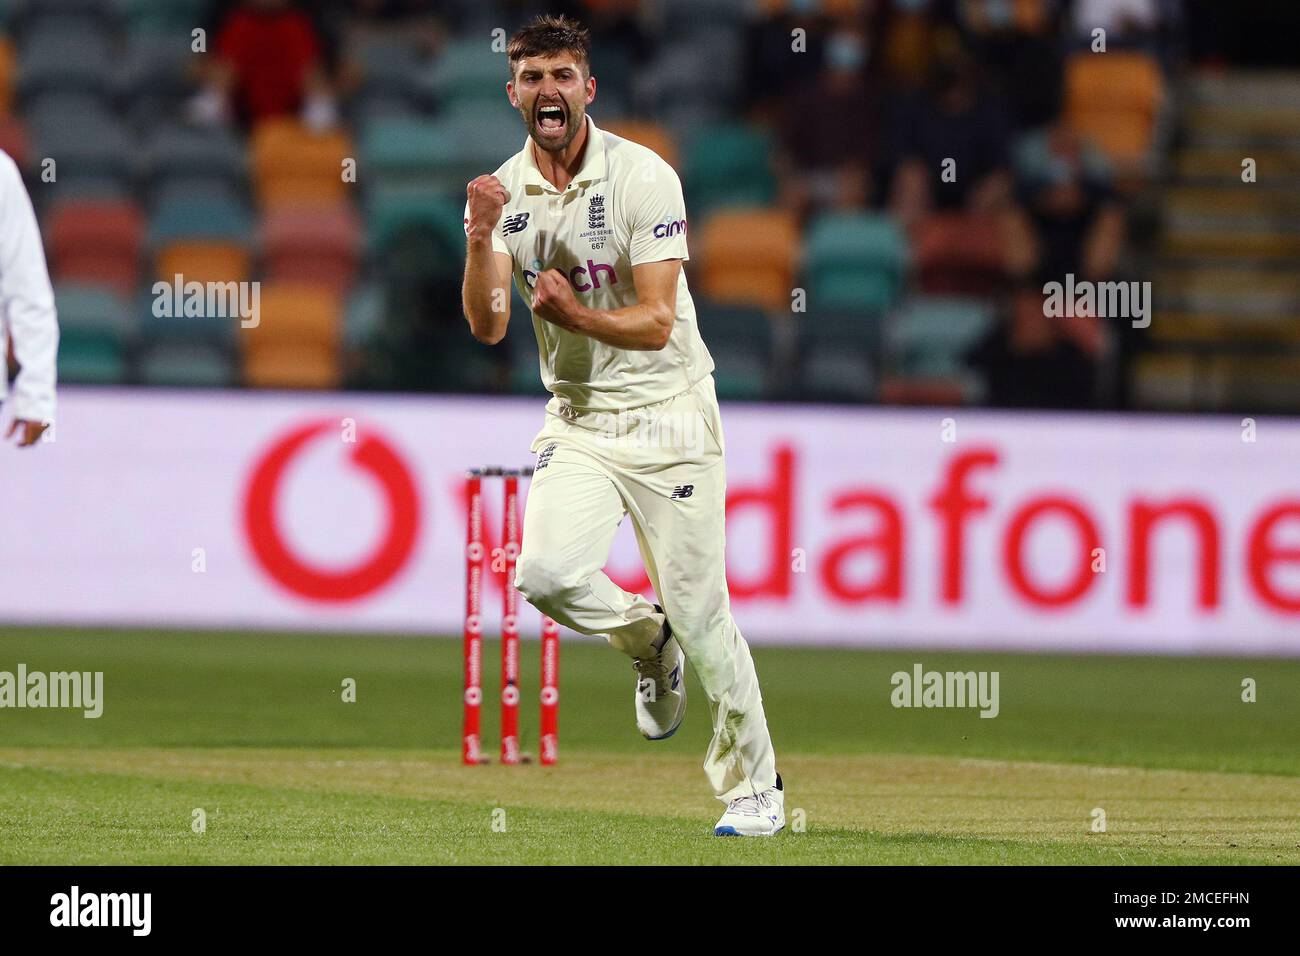 England's Mark Wood celebrates taking the wicket of Australia's Cameron Green during their Ashes cricket test match in Hobart, Friday, Jan. 14, 2022. (AP Photo/Tertius Pickard) Stock Photo